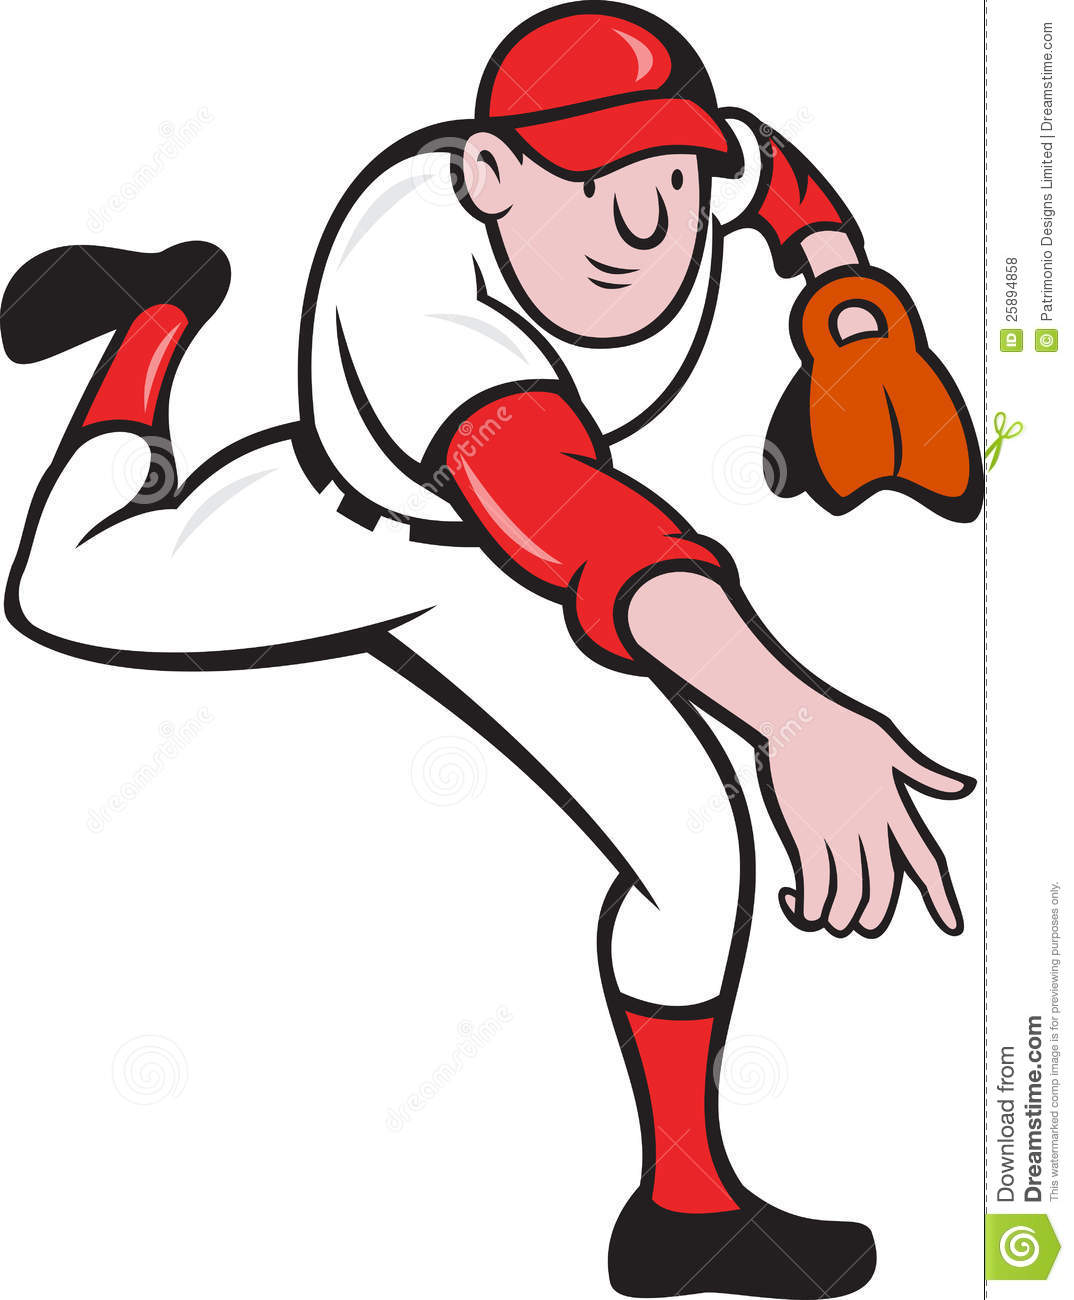 Baseball Player Pitching Clipart   Clipart Panda   Free Clipart Images